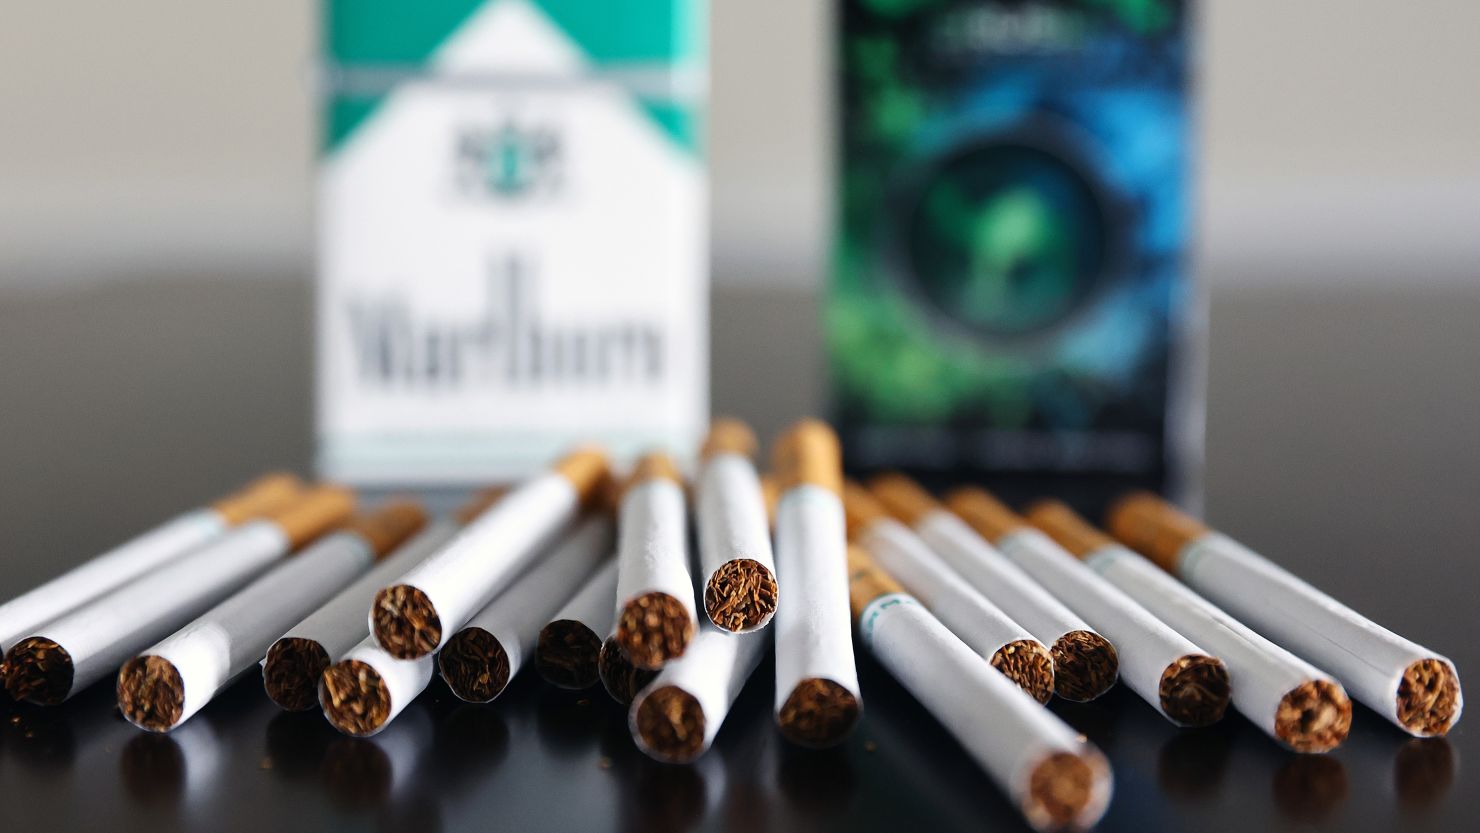 In this photo illustration, menthol cigarettes sit on a table on April 28, 2022 in Los Angeles, California. The Food and Drug Administration (FDA) is proposing to ban both menthol-flavored cigarettes and flavored cigars in a move hailed by public health experts which could potentially lead to 1.3 million people quitting smoking.